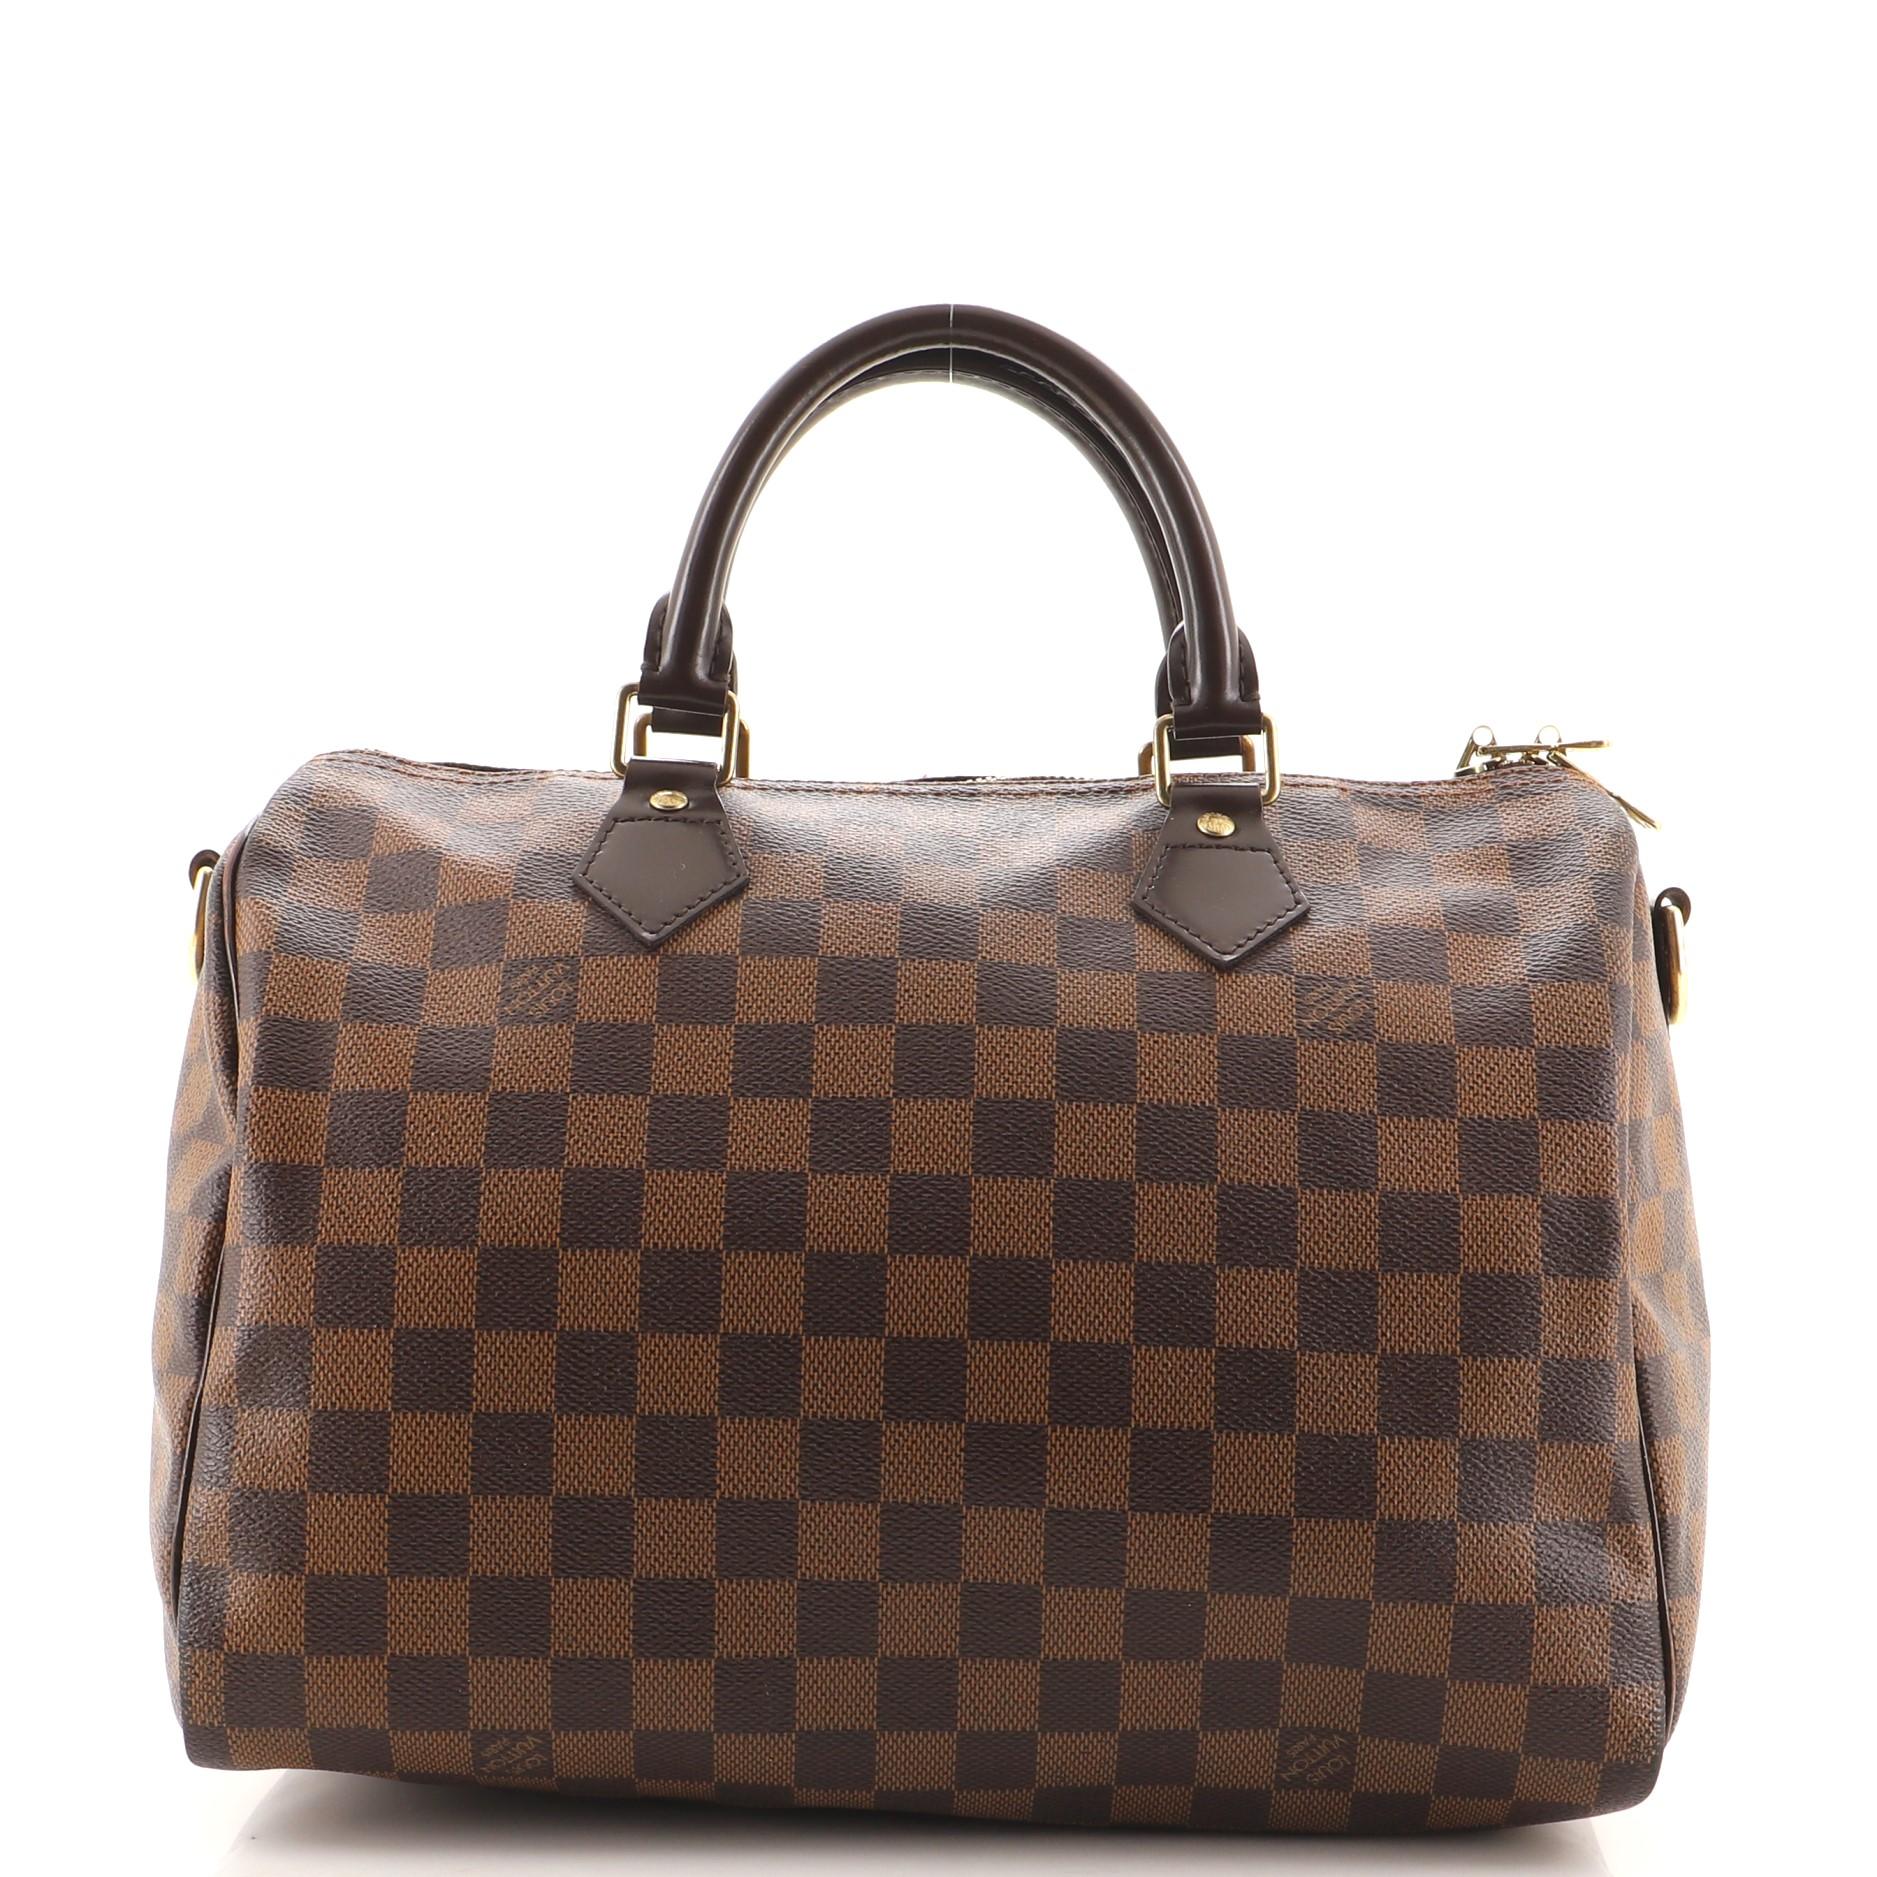 Louis Vuitton Speedy Bandouliere Bag Damier 30 In Fair Condition For Sale In NY, NY